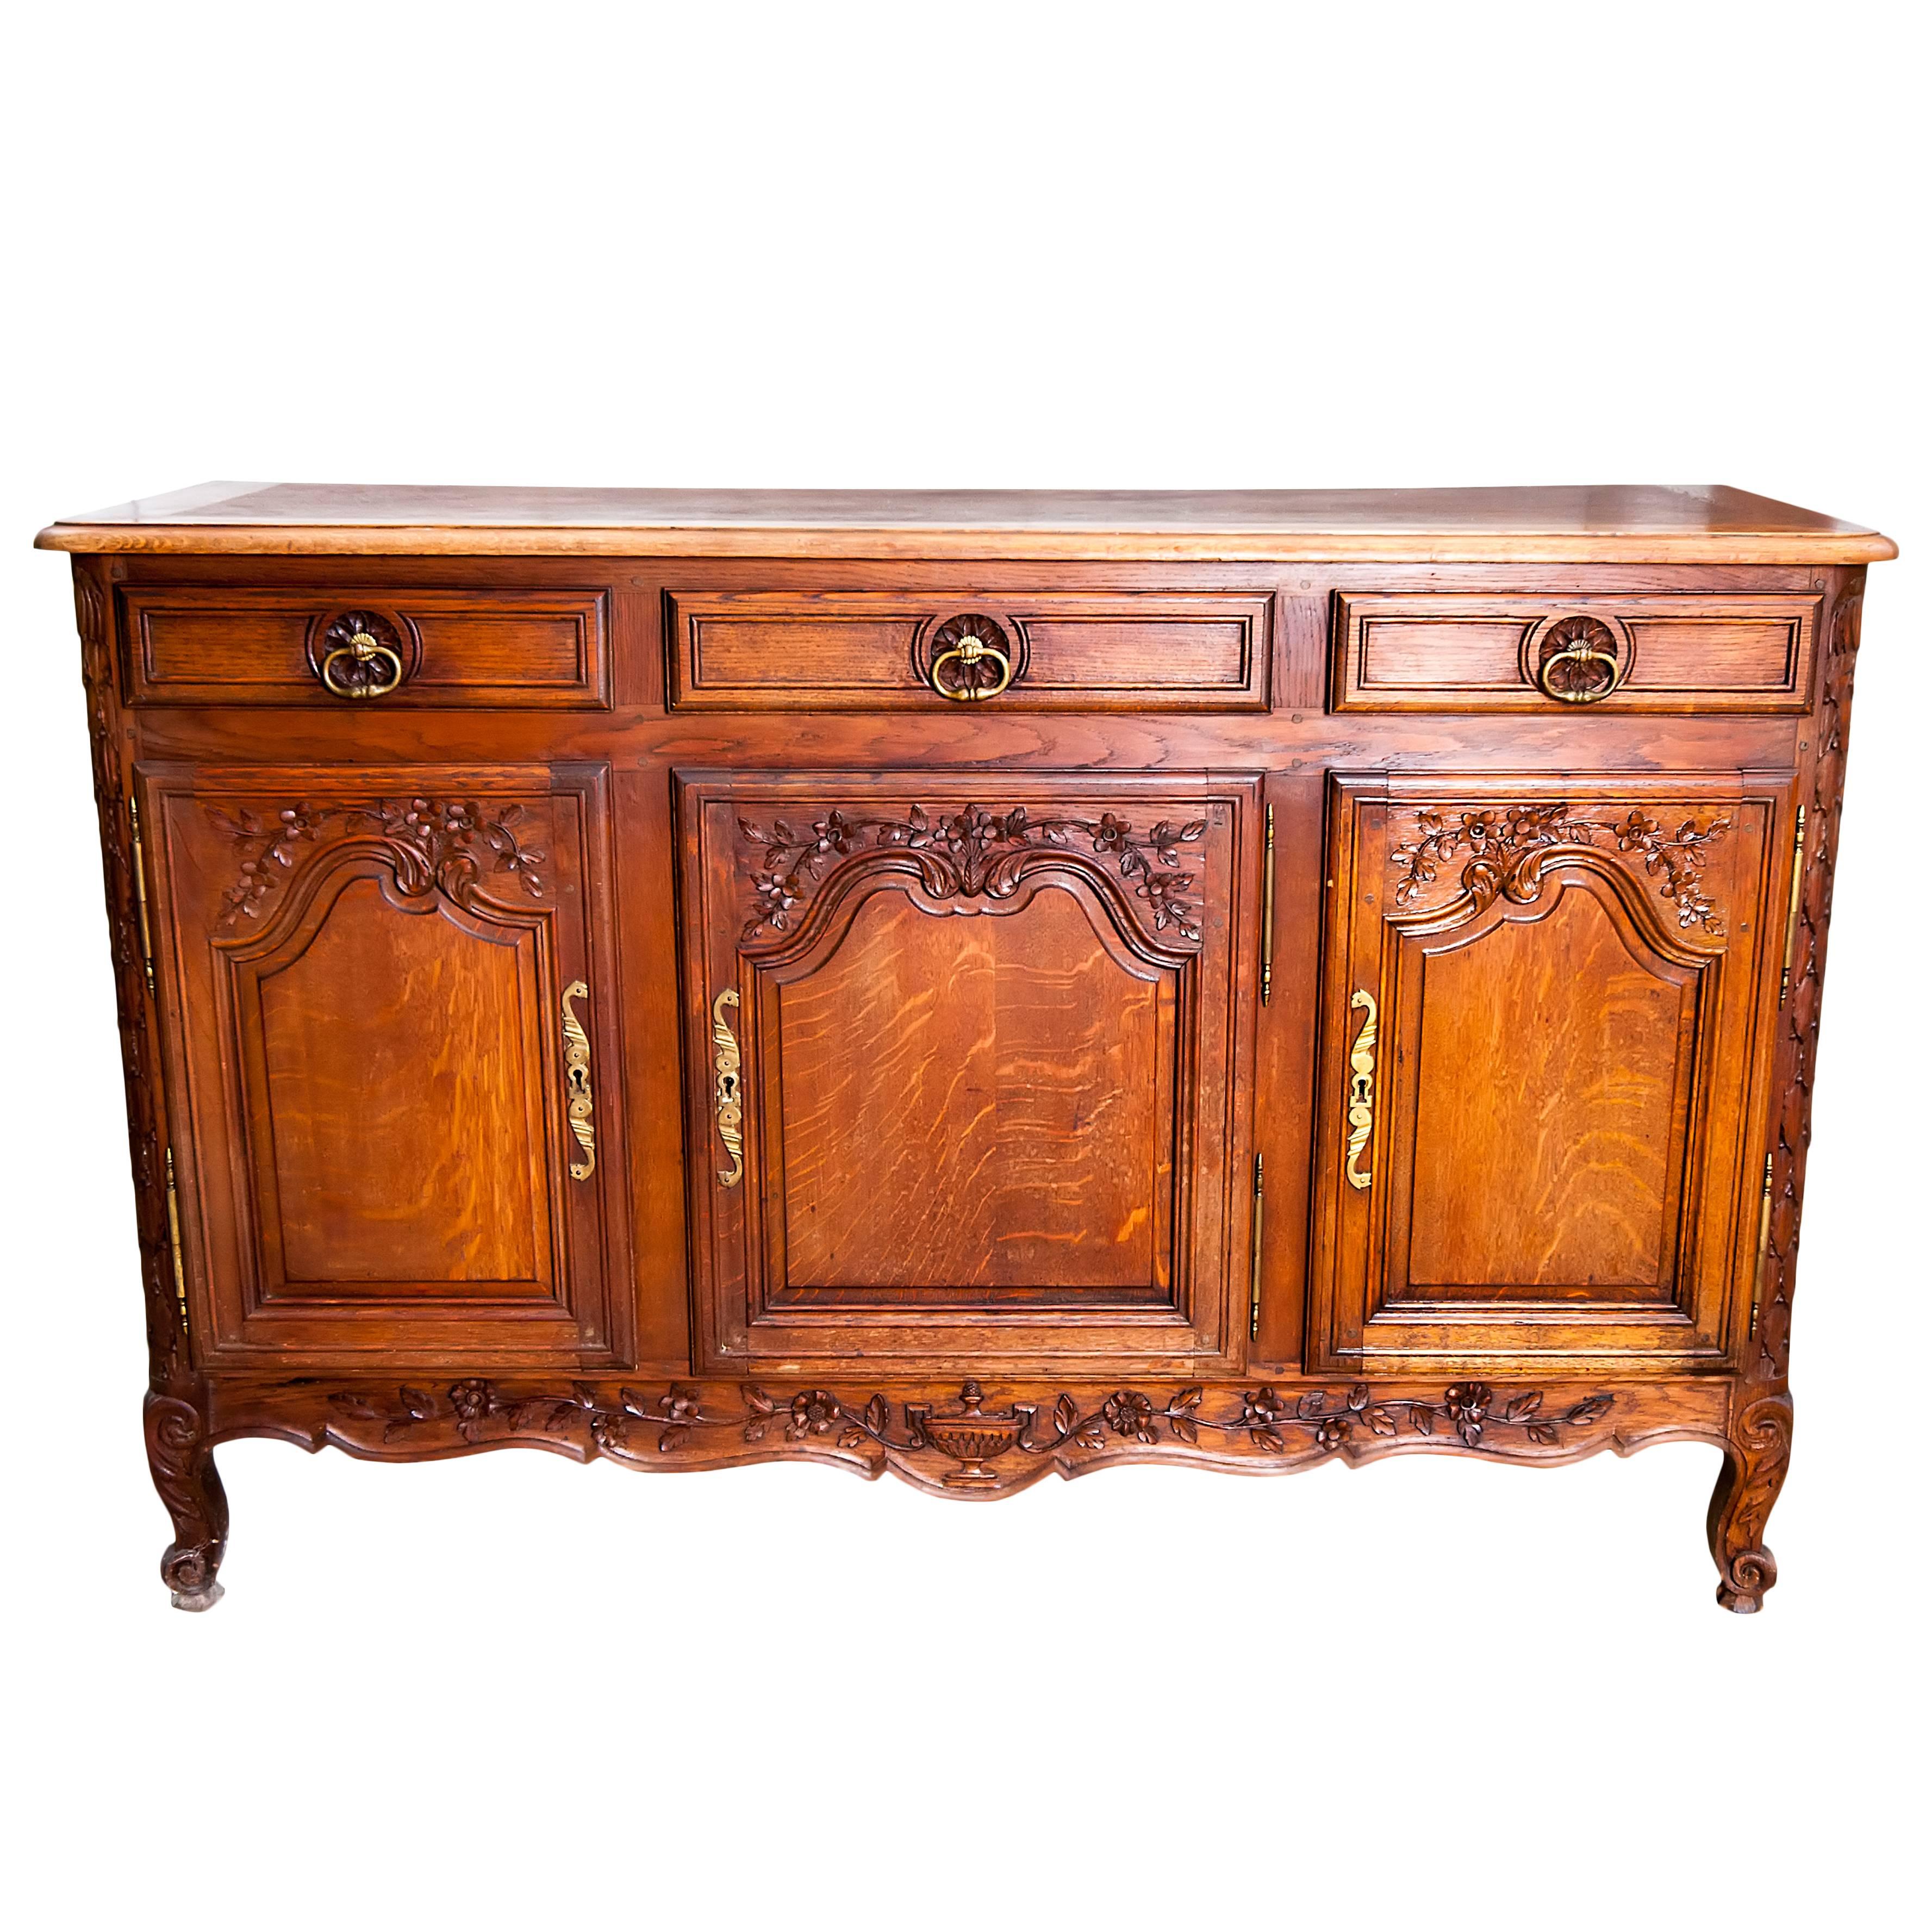 Late 19th Century French Regency Three-Door Three-Drawer Enfilade in Carved Oak